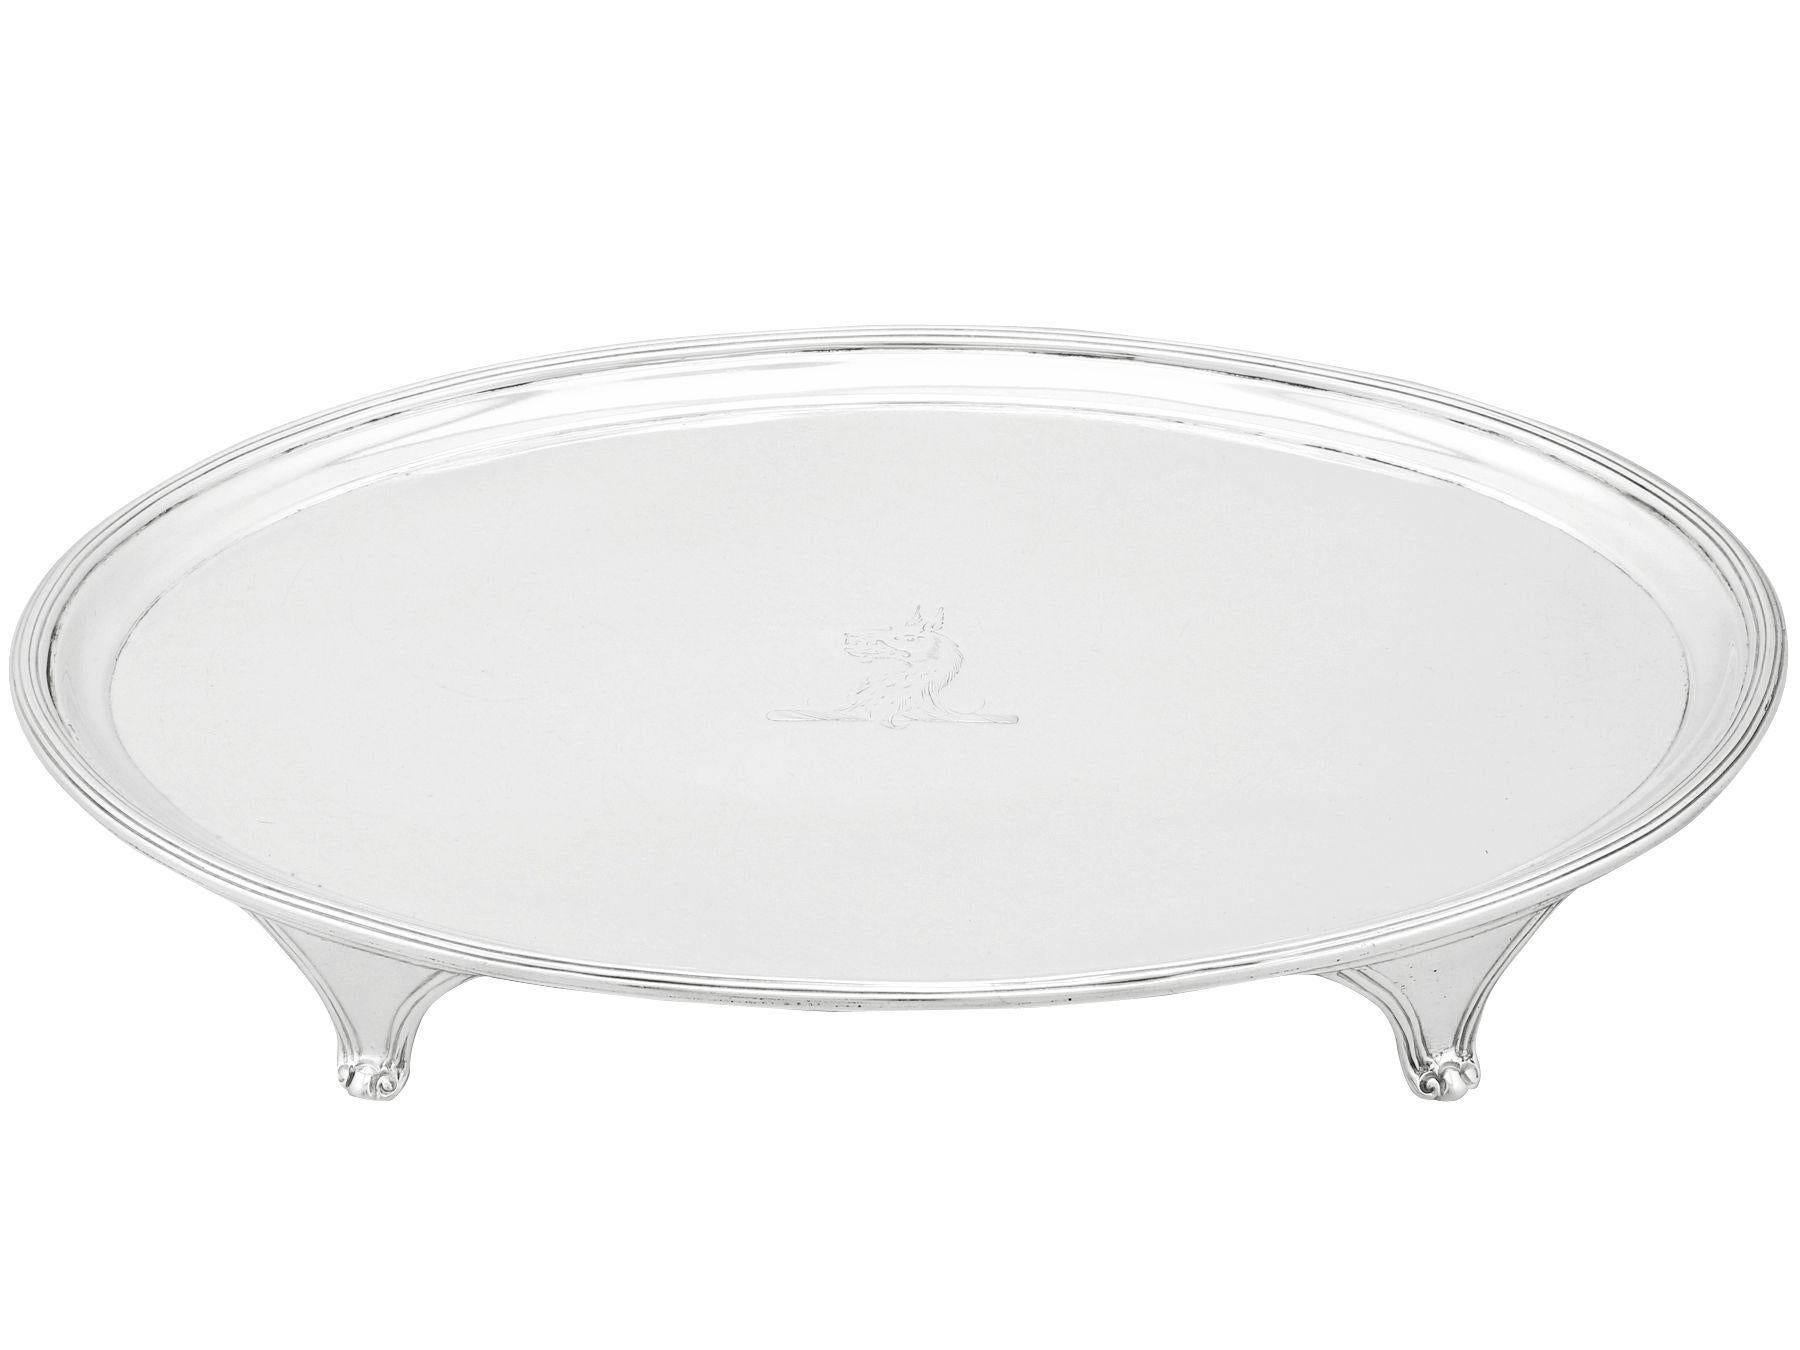 An exceptional, fine and impressive antique George III English sterling silver salver made by Henry Chawner; an addition to our Georgian silverware collection

This exceptional antique George III sterling silver salver by Henry Chawner has a plain